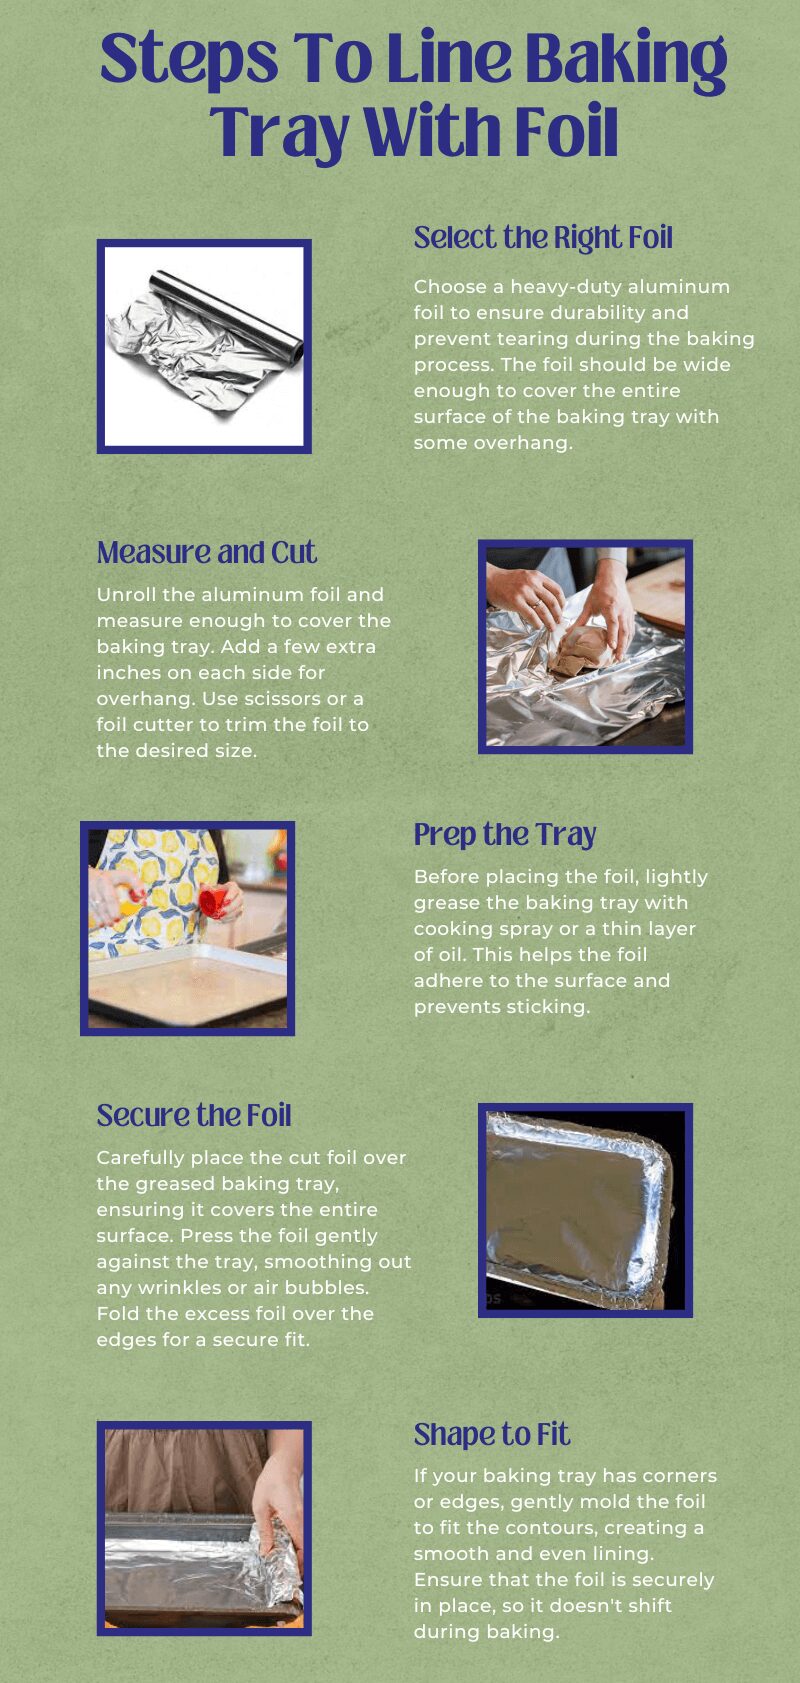 Steps To Line Baking Trays With Foil